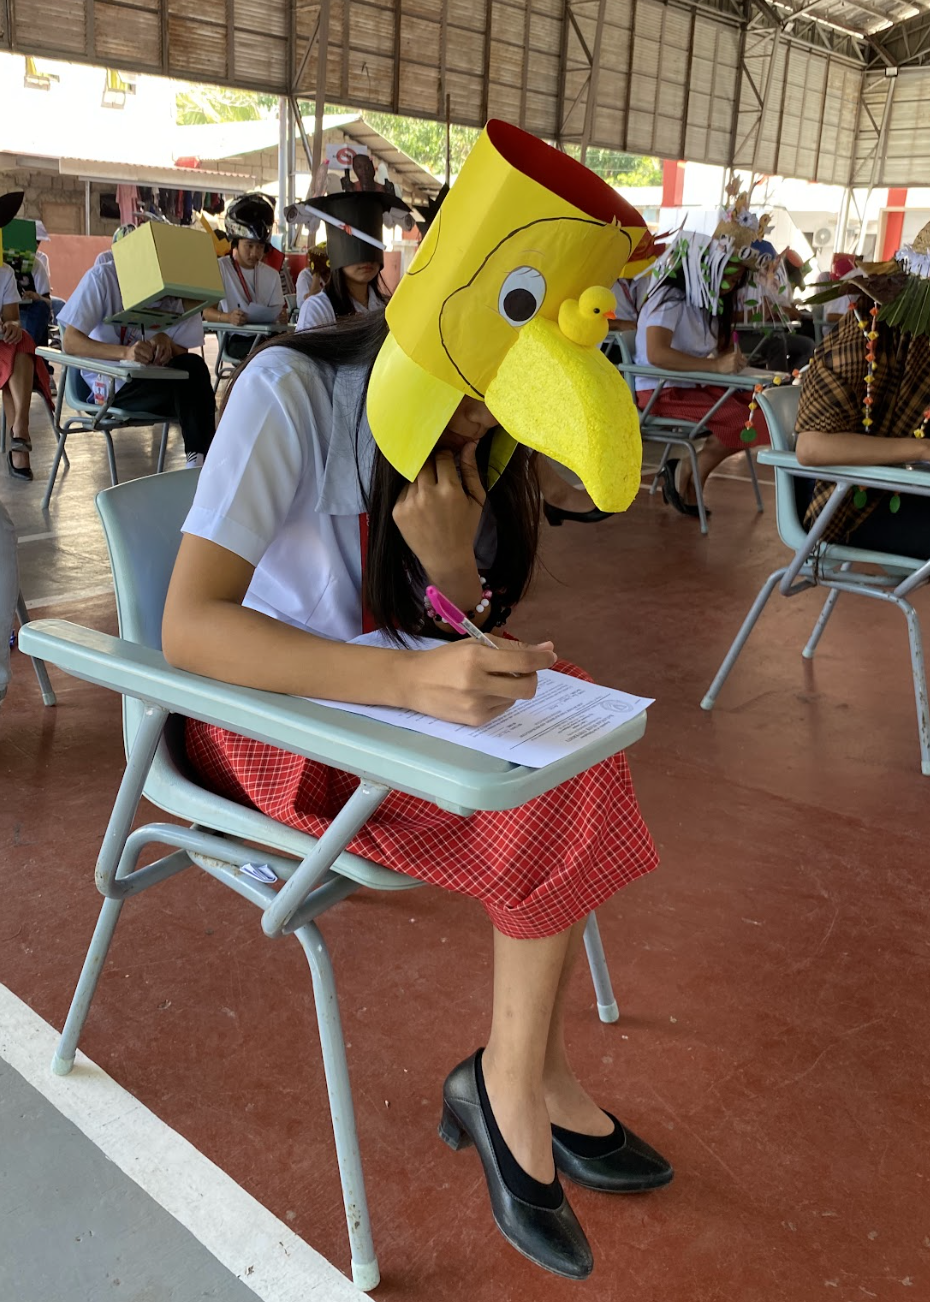 Student in a plaid skirt and black shoes wearing a large bird head mask while seated and writing